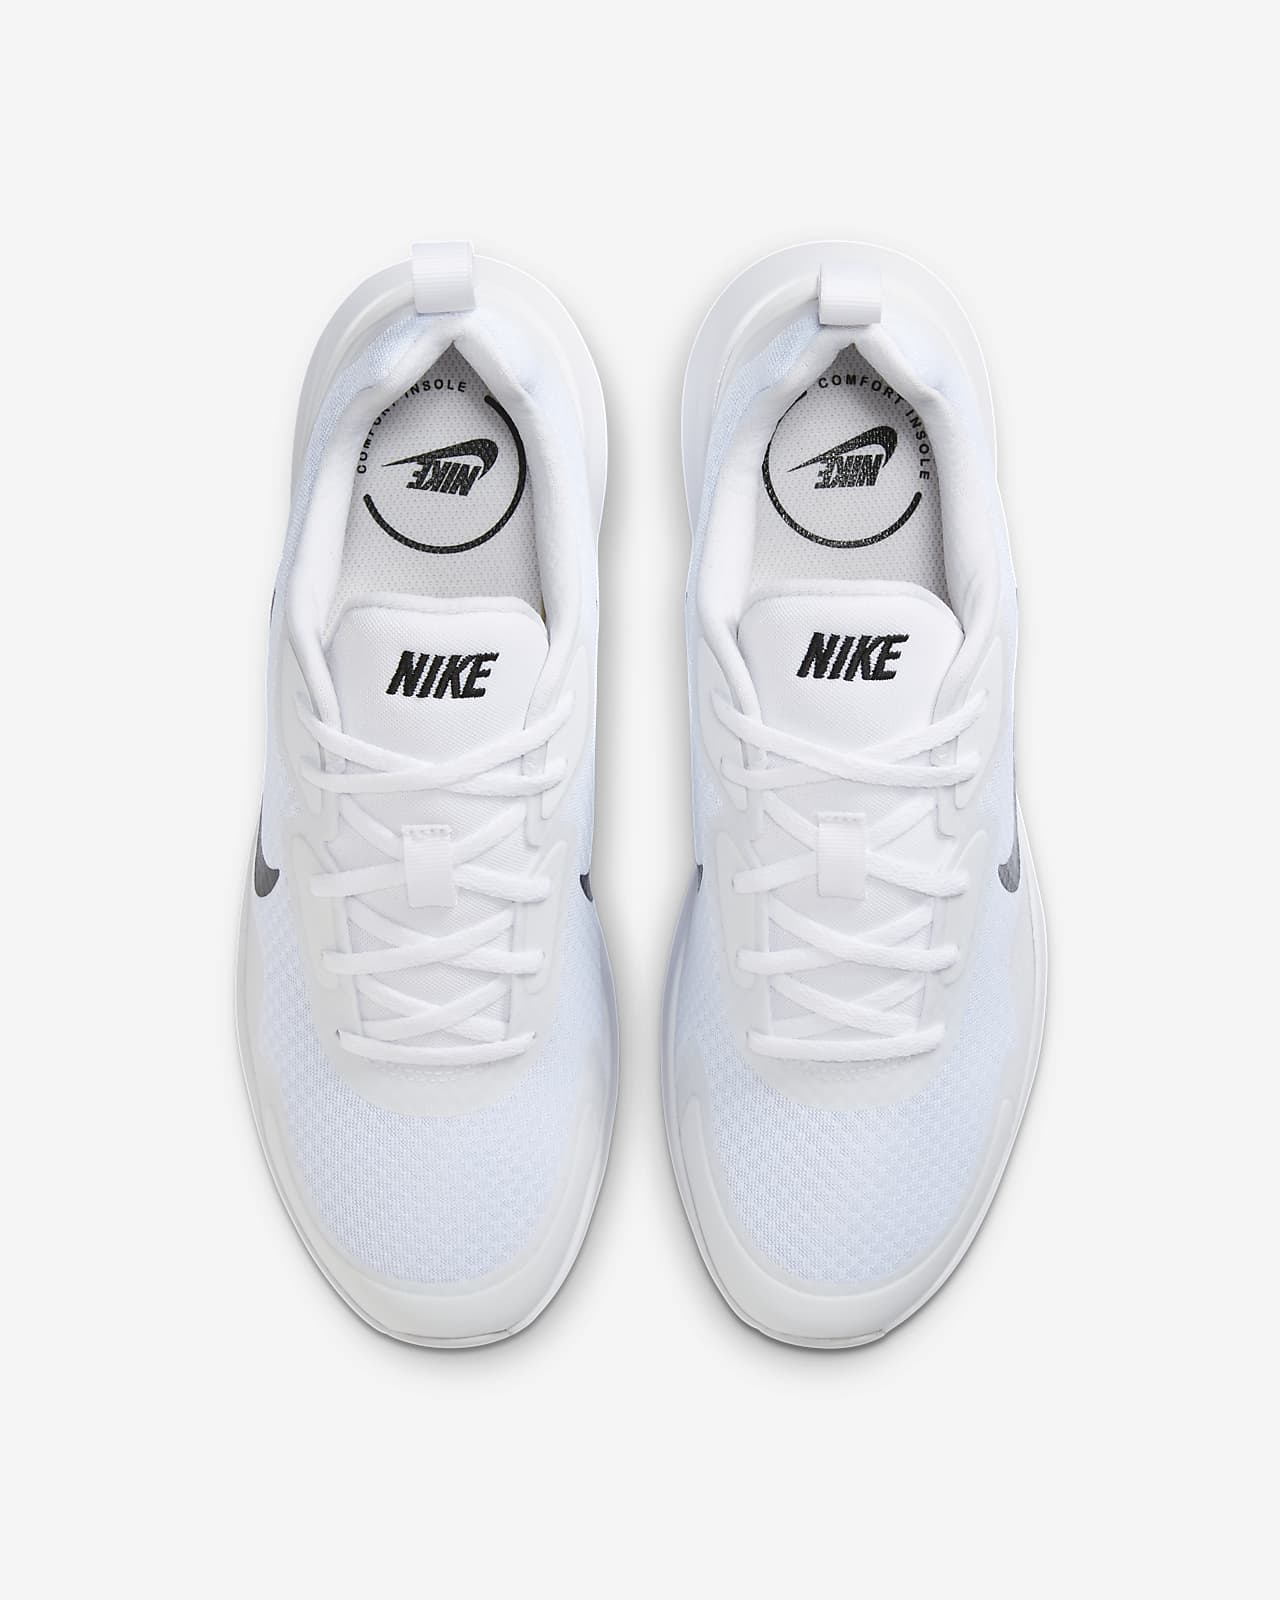 nike with rubber sole